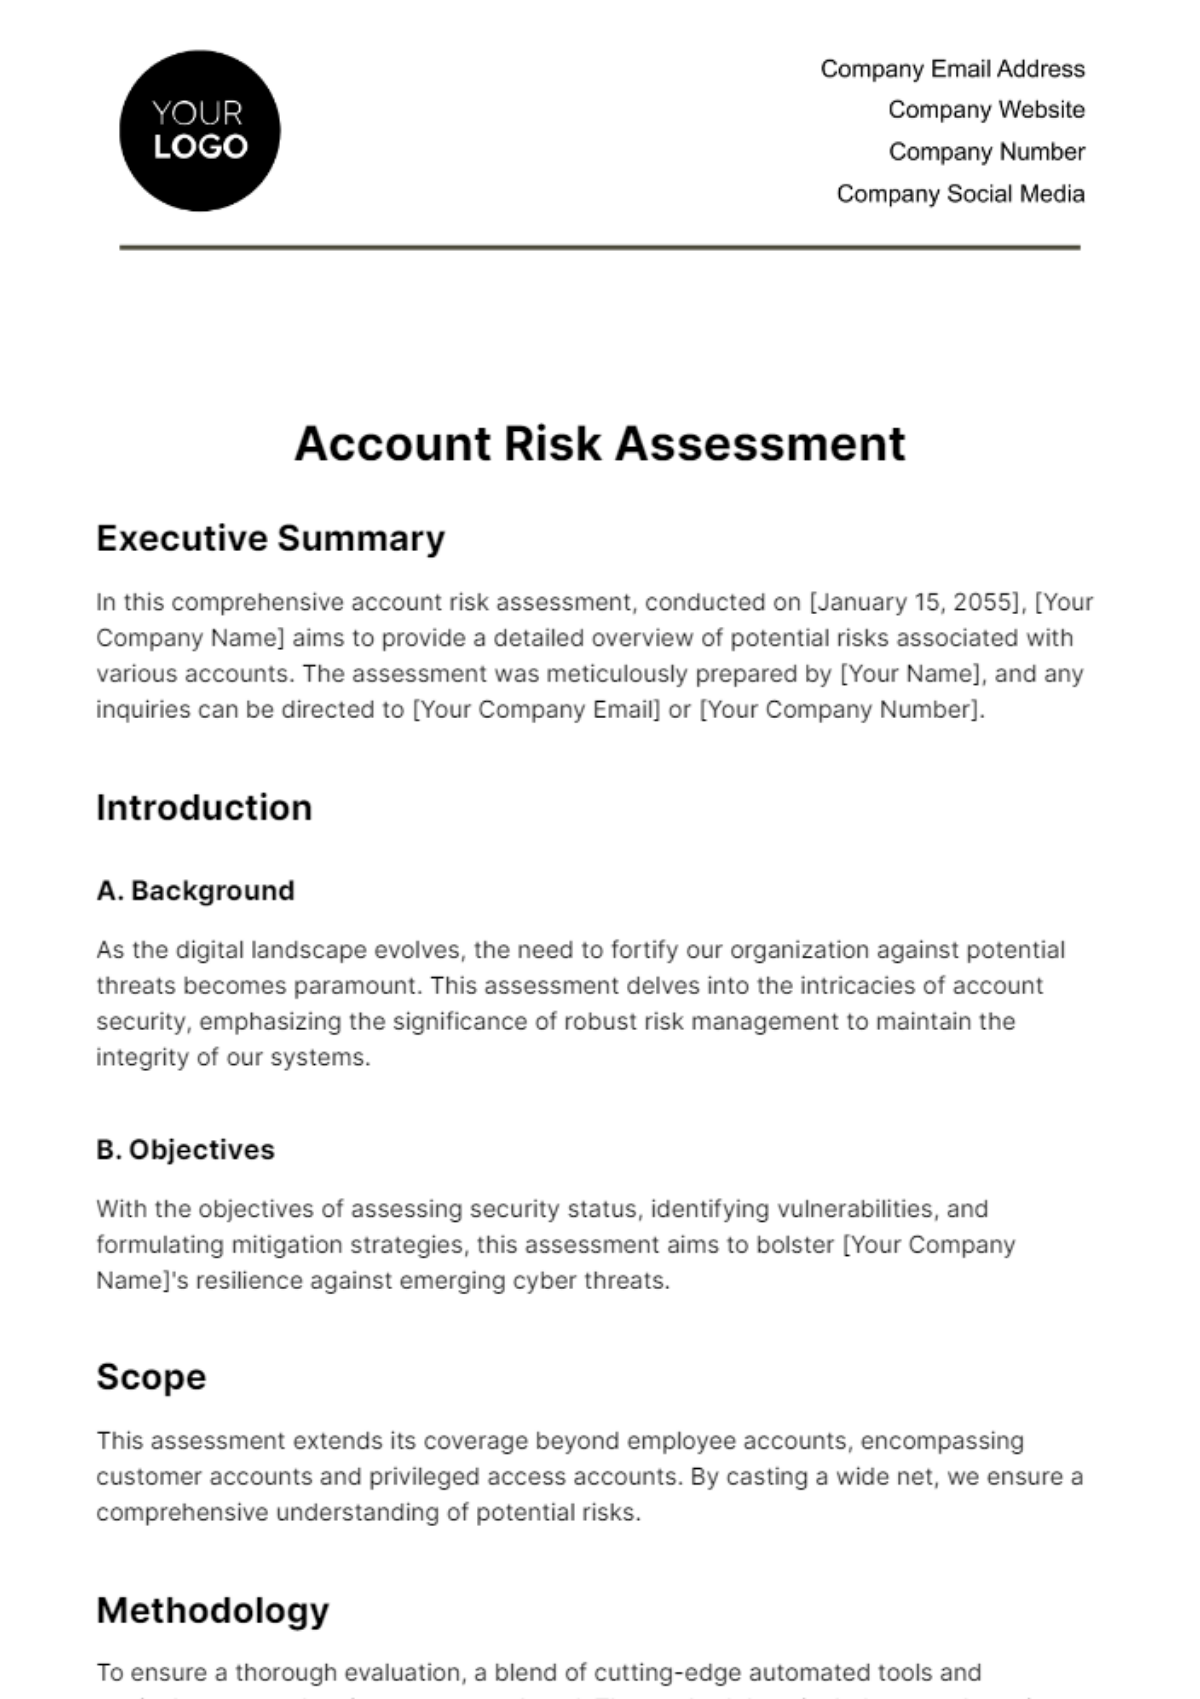 Free Account Risk Assessment Template